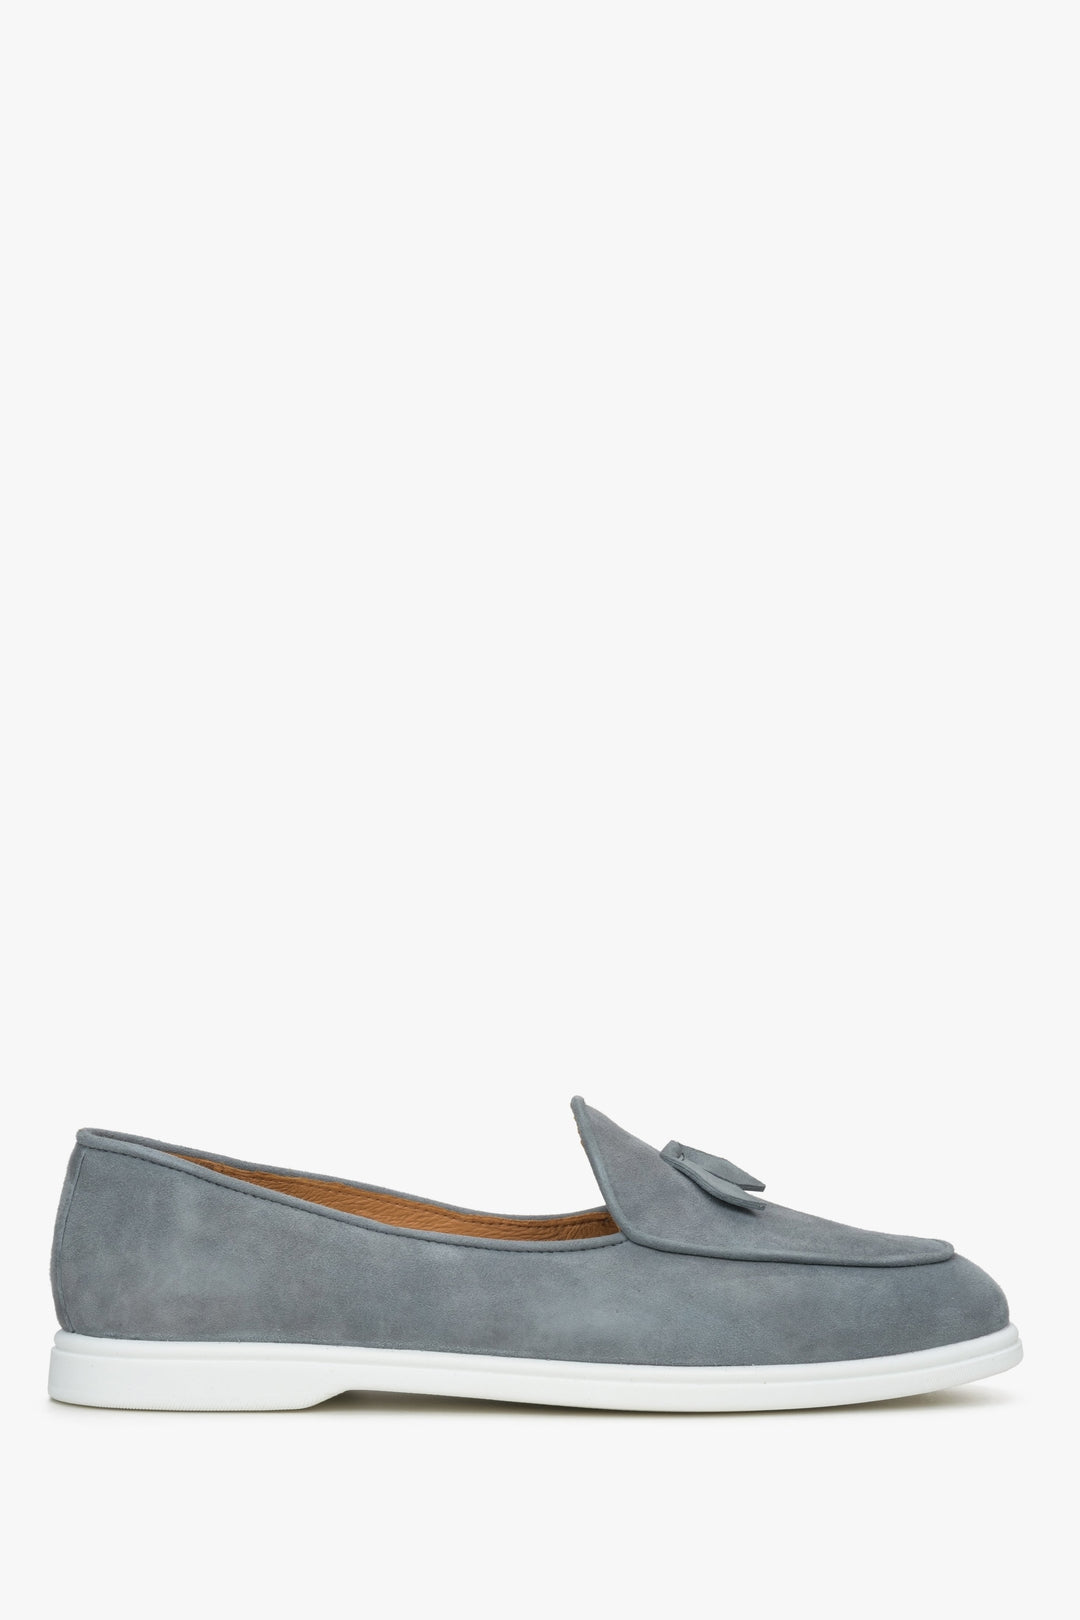 Women's Grey Loafers made of Italian Genuine Velour with Fringes Estro ER00114895.